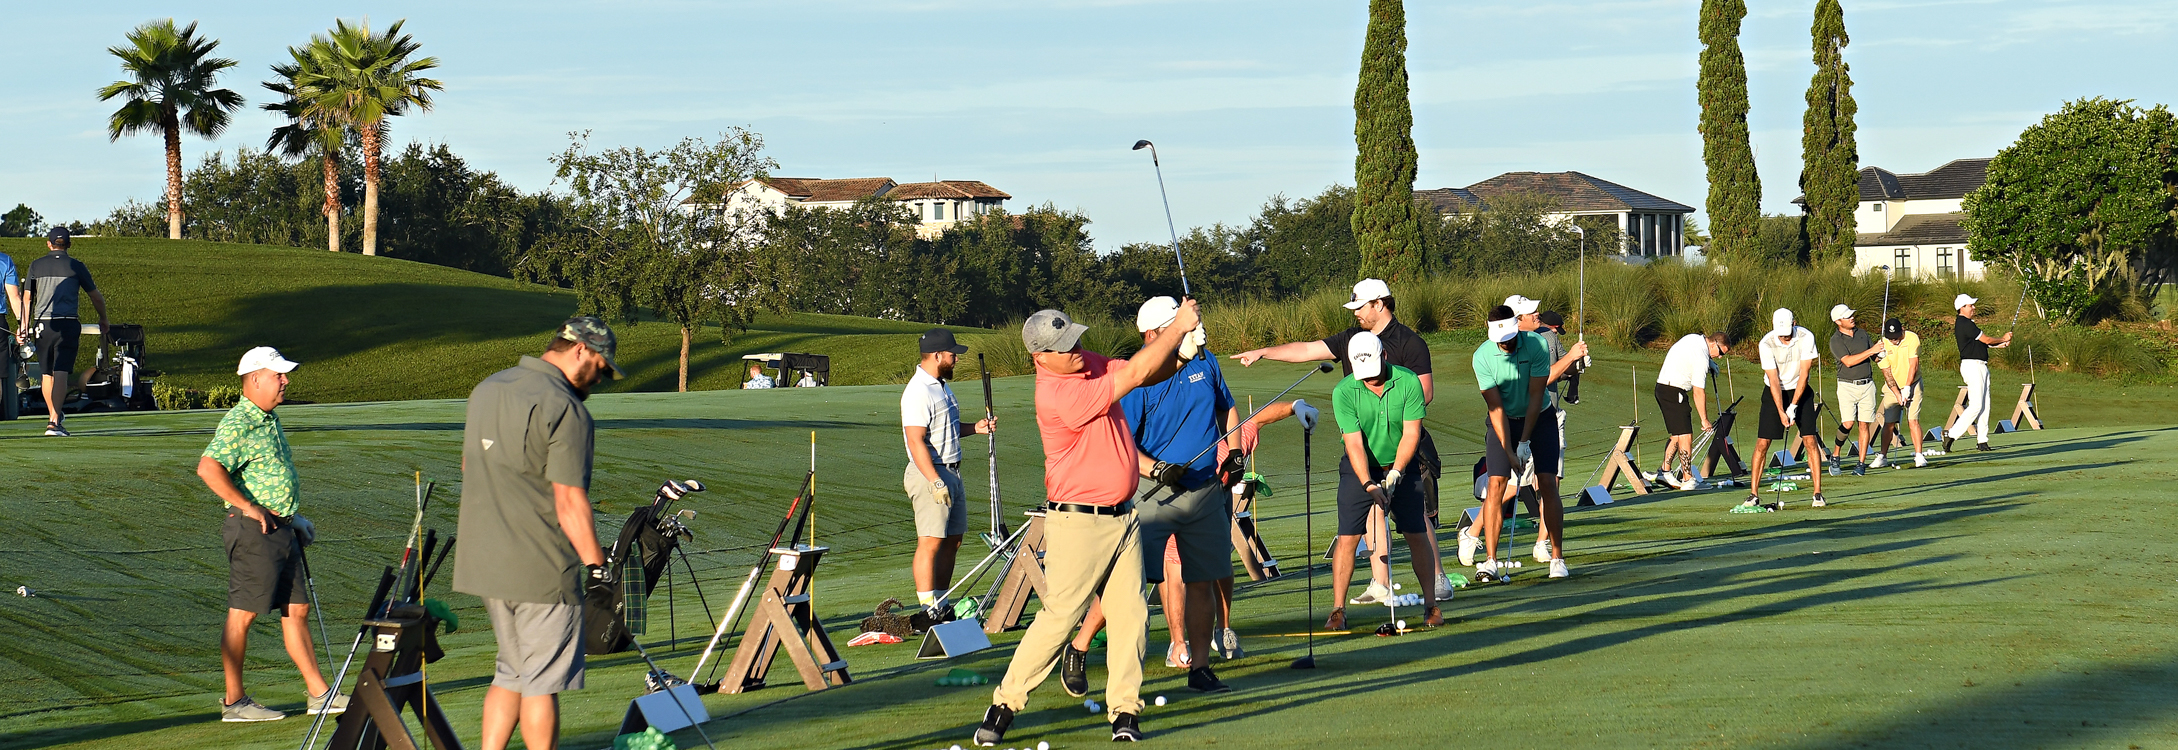 Central Florida Luxury Golf - Host Your Own Tournament at Bella Collina